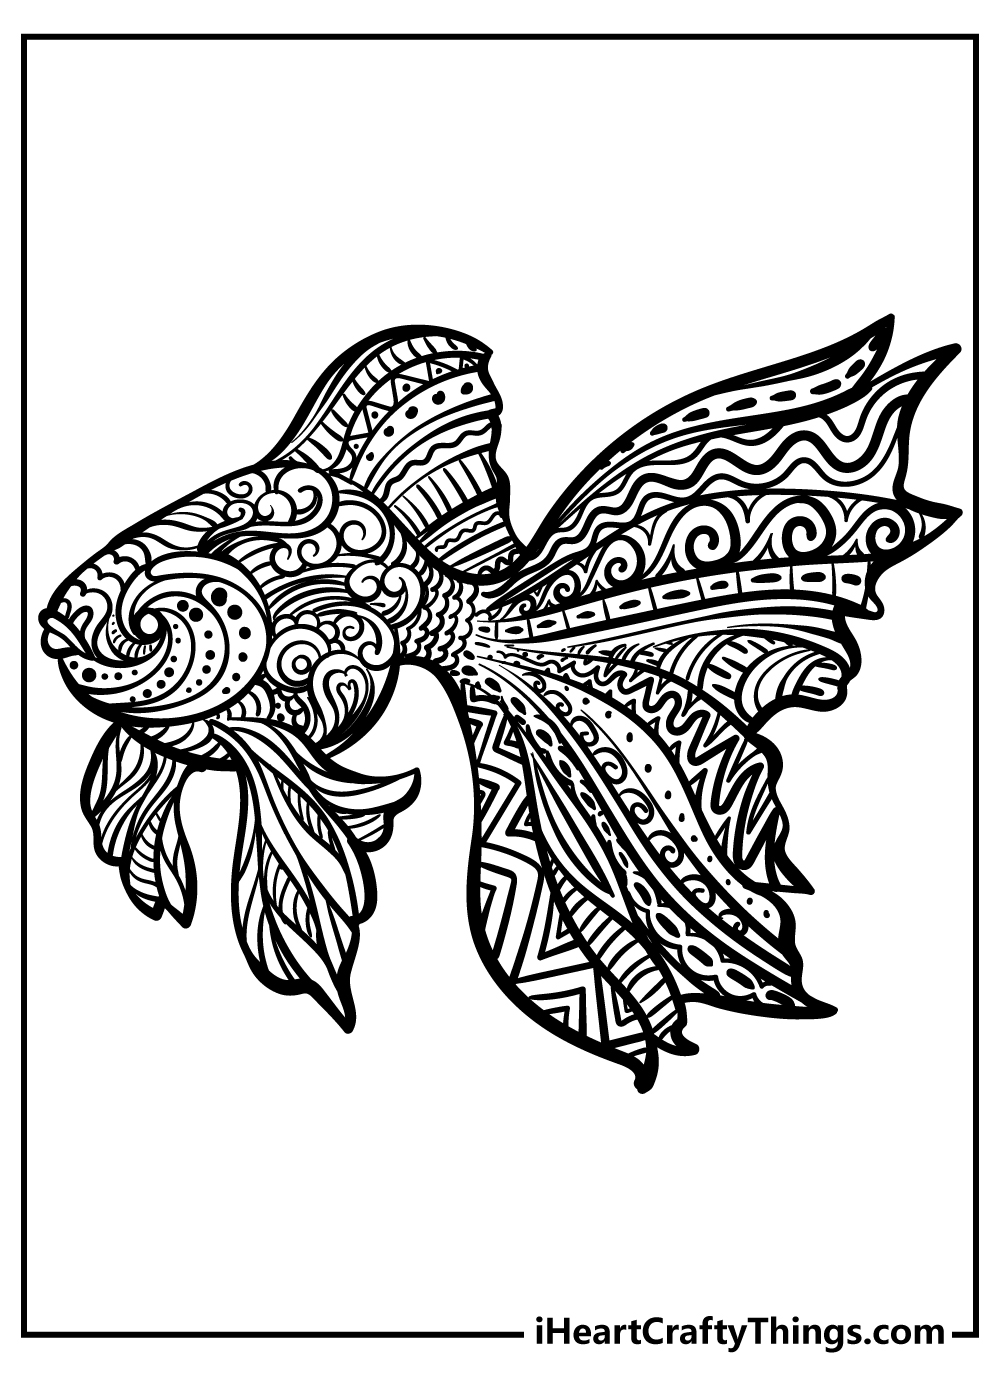 Adult Coloring Pages free pdf